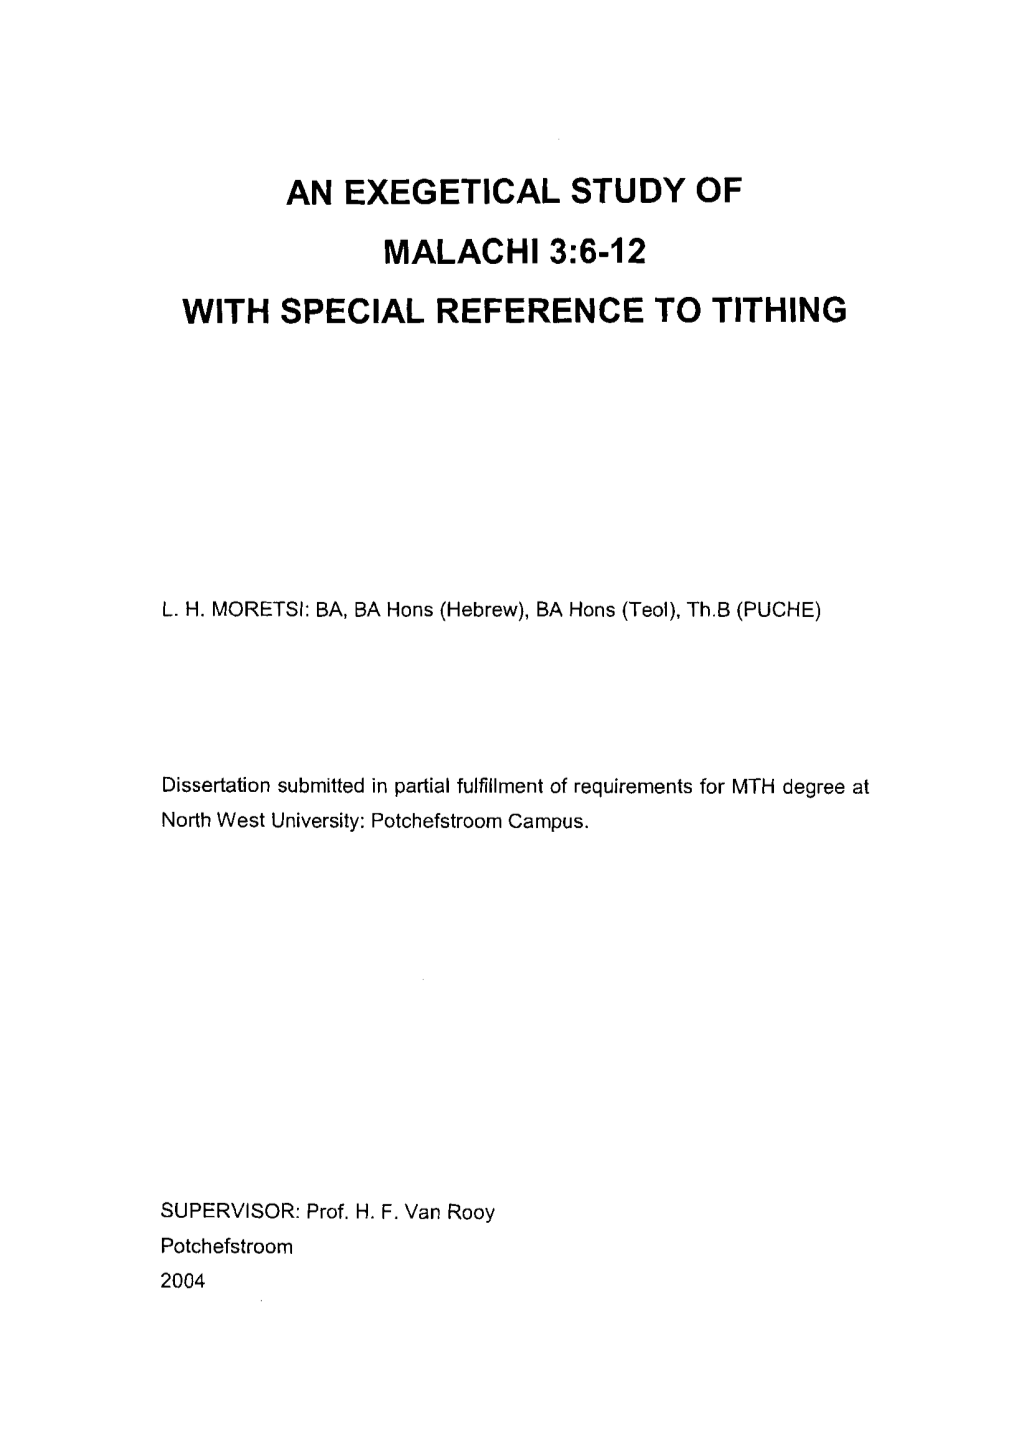 An Exegetical Study of Malachi 3:6-12 with Special Reference to Tithing